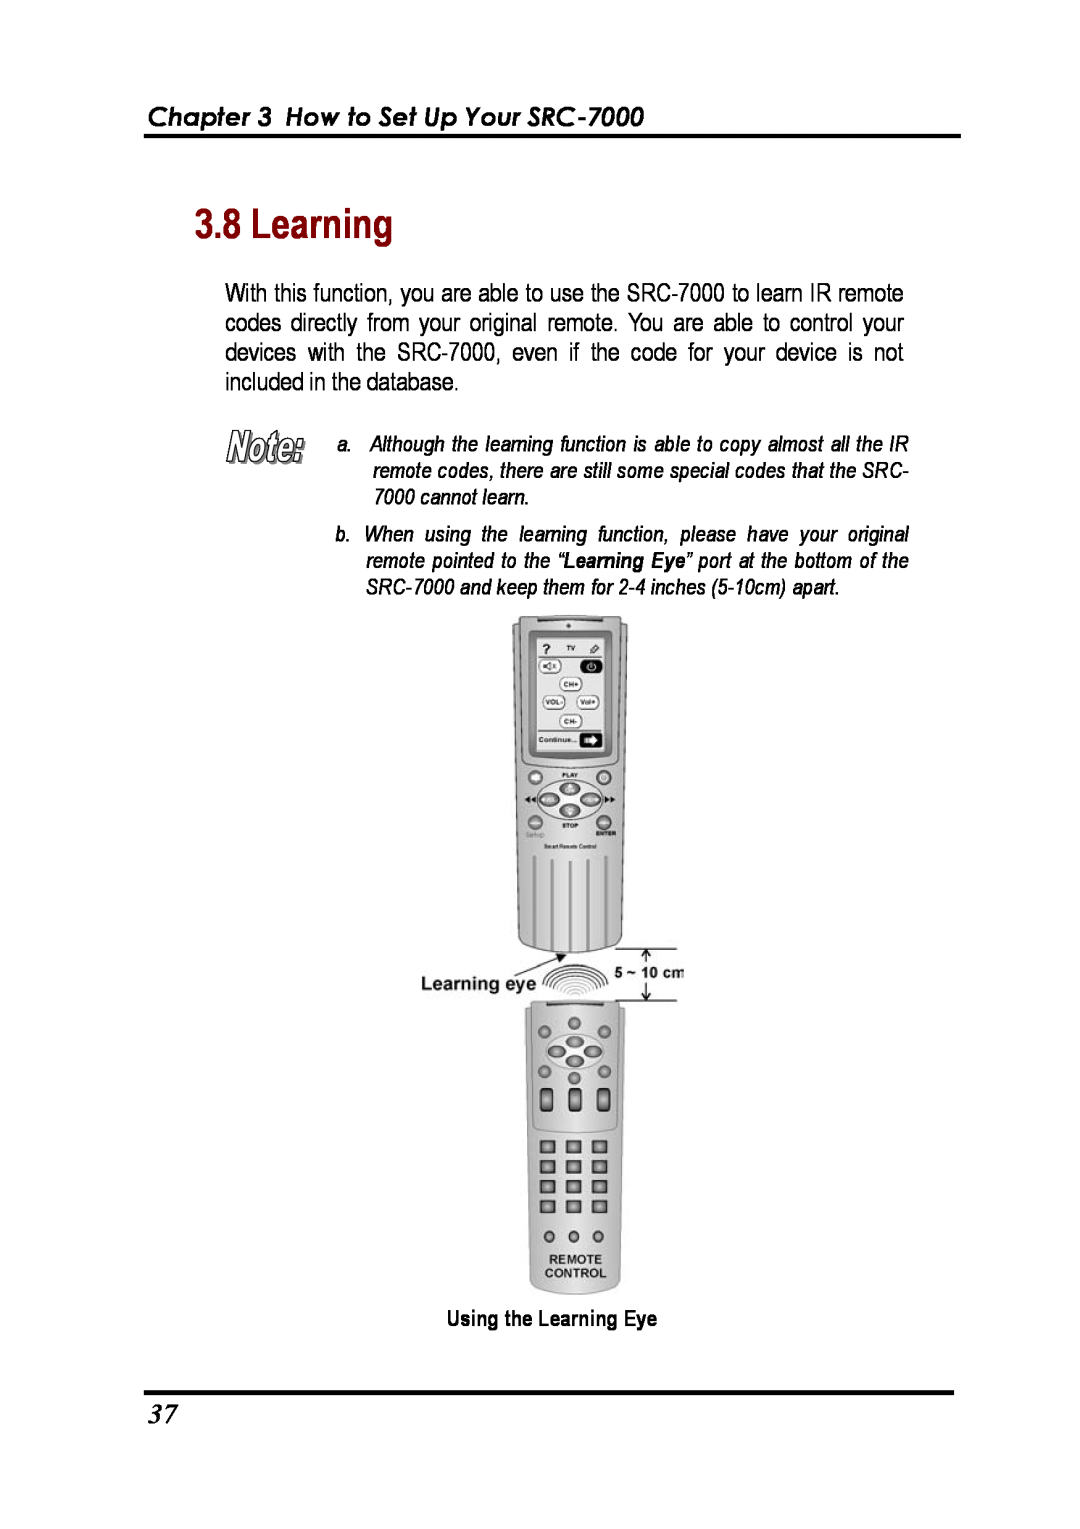 Sunwave Tech manual How to Set Up Your SRC-7000, Using the Learning Eye 